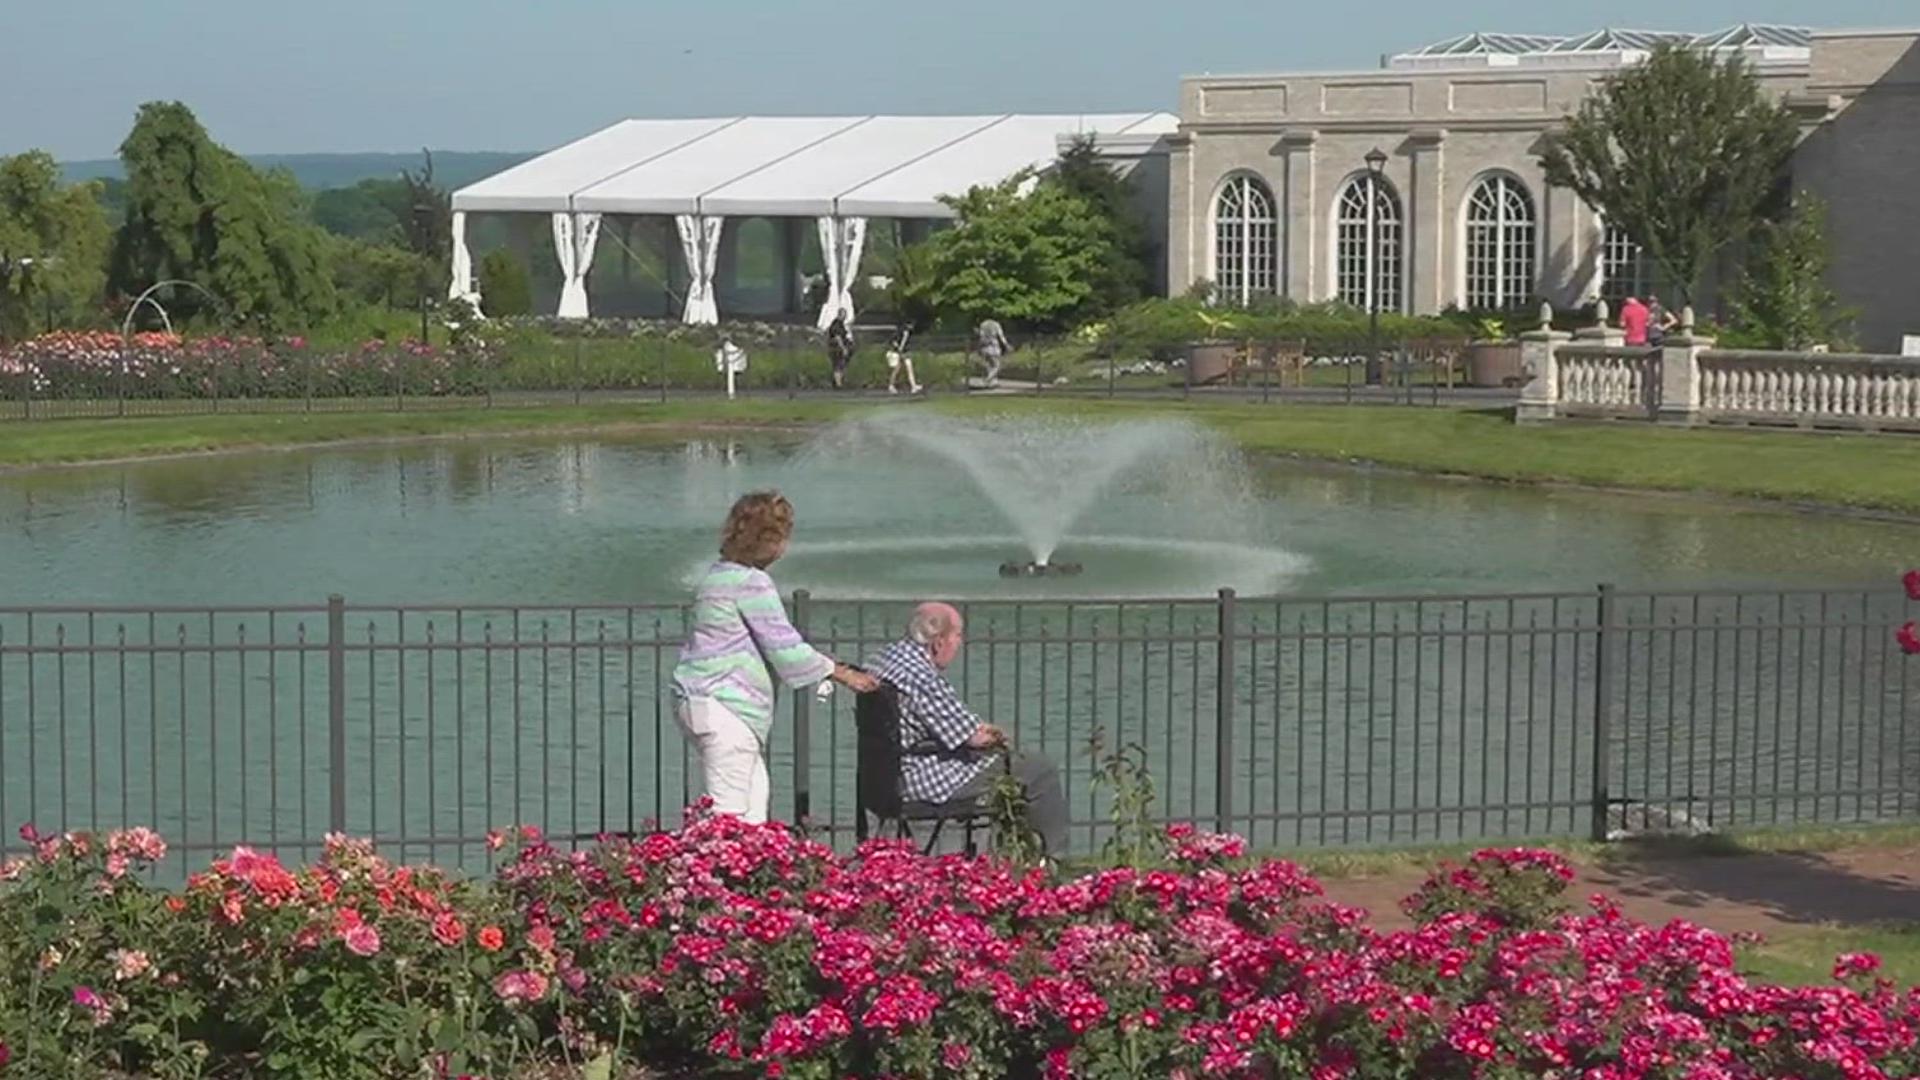 Families of all shapes and sizes took advantage of free admission for dads at Hershey Gardens on Father's Day.